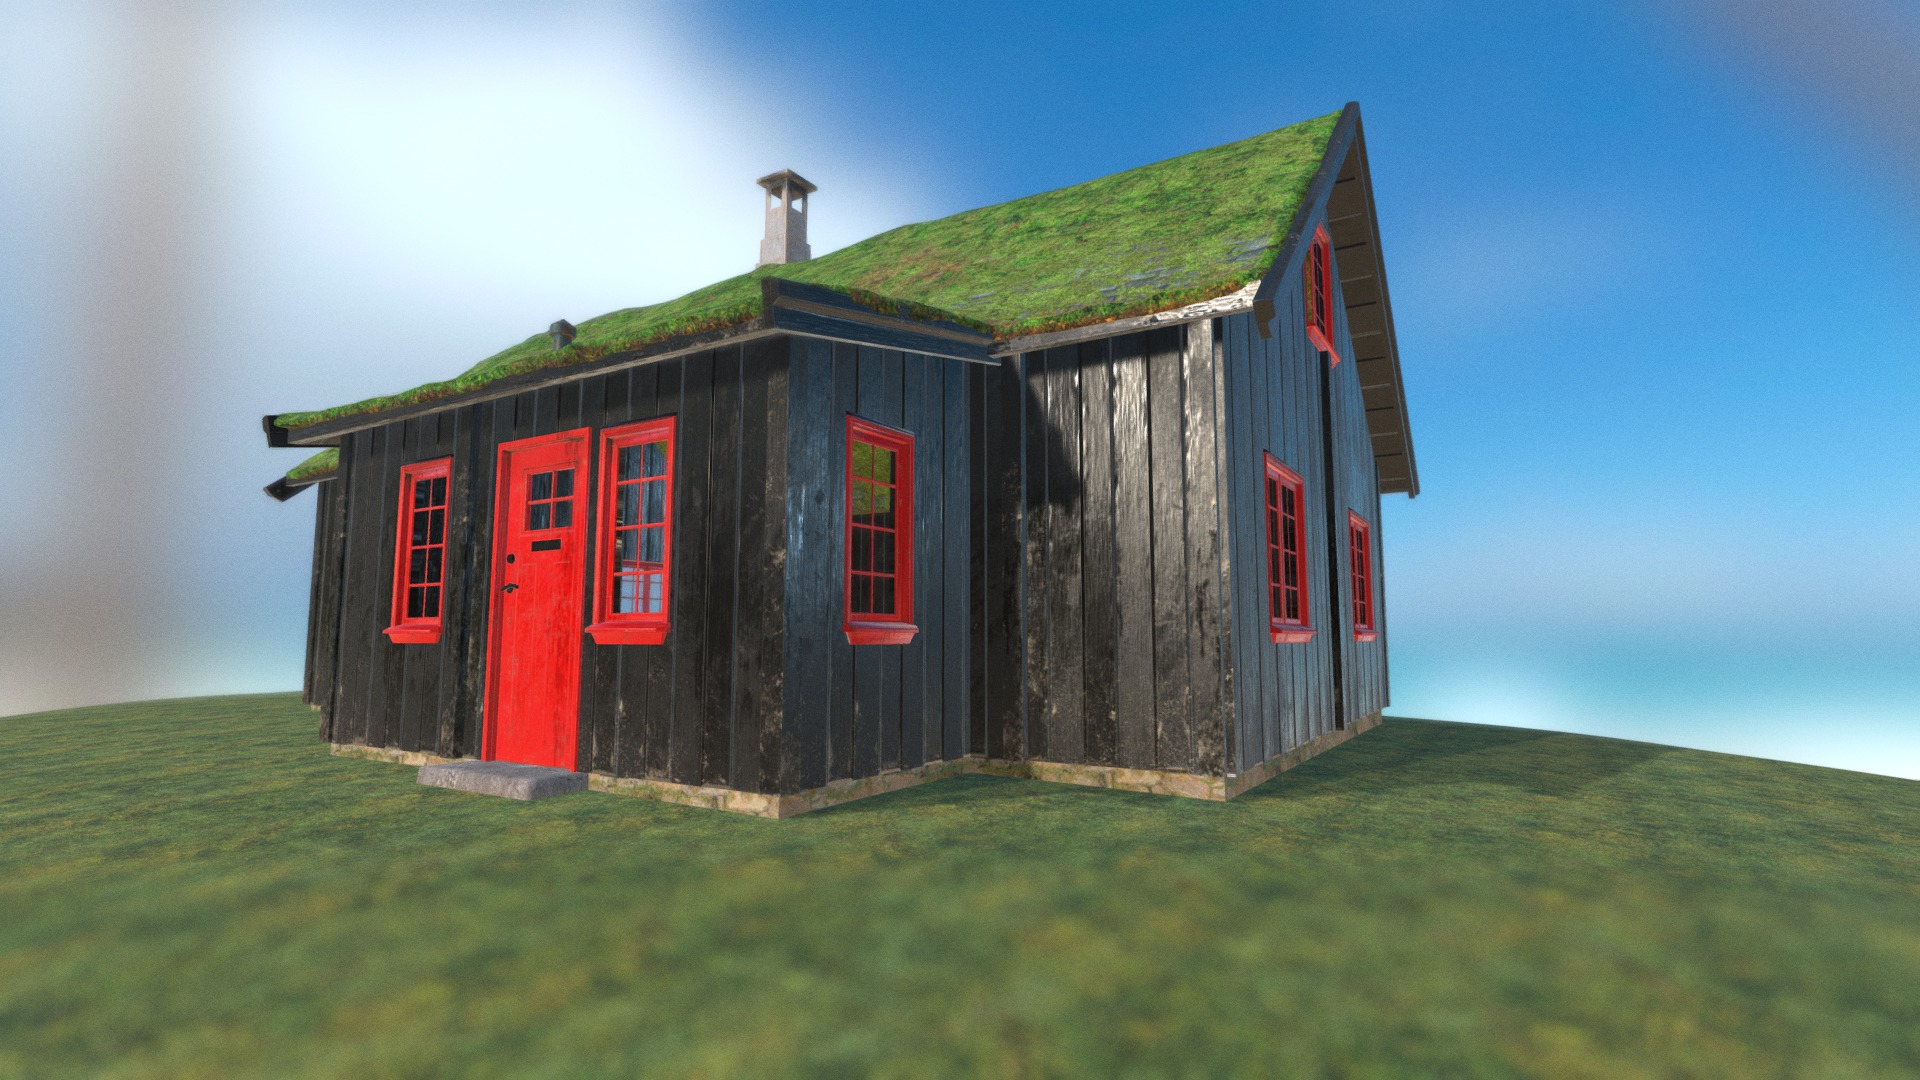 3D model Faroe Island House - This is a 3D model of the Faroe Island House. The 3D model is about a small wooden building on a grassy hill.